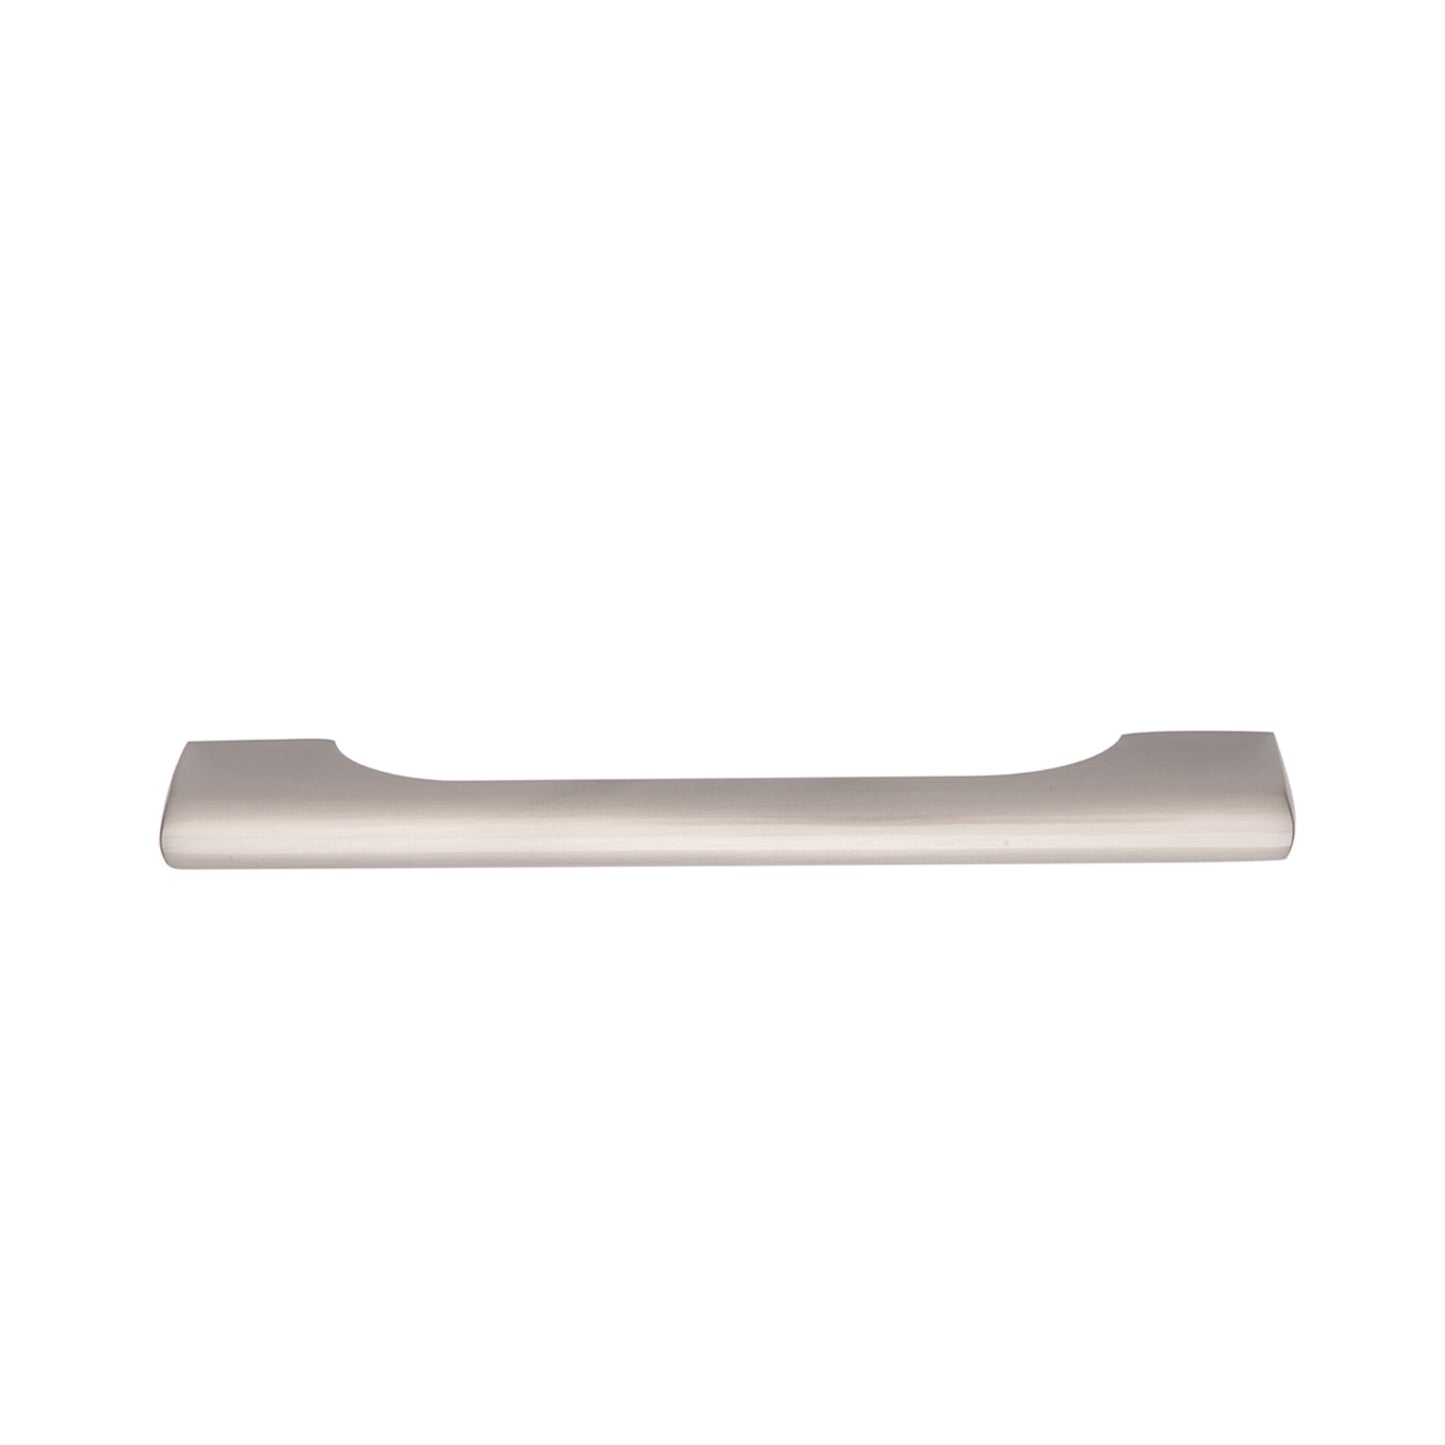 South Main Hardware Wide Die Cast Cabinet Handle, 6.57" Length (6.3" Hole Center), Satin Nickel, 10-Pack